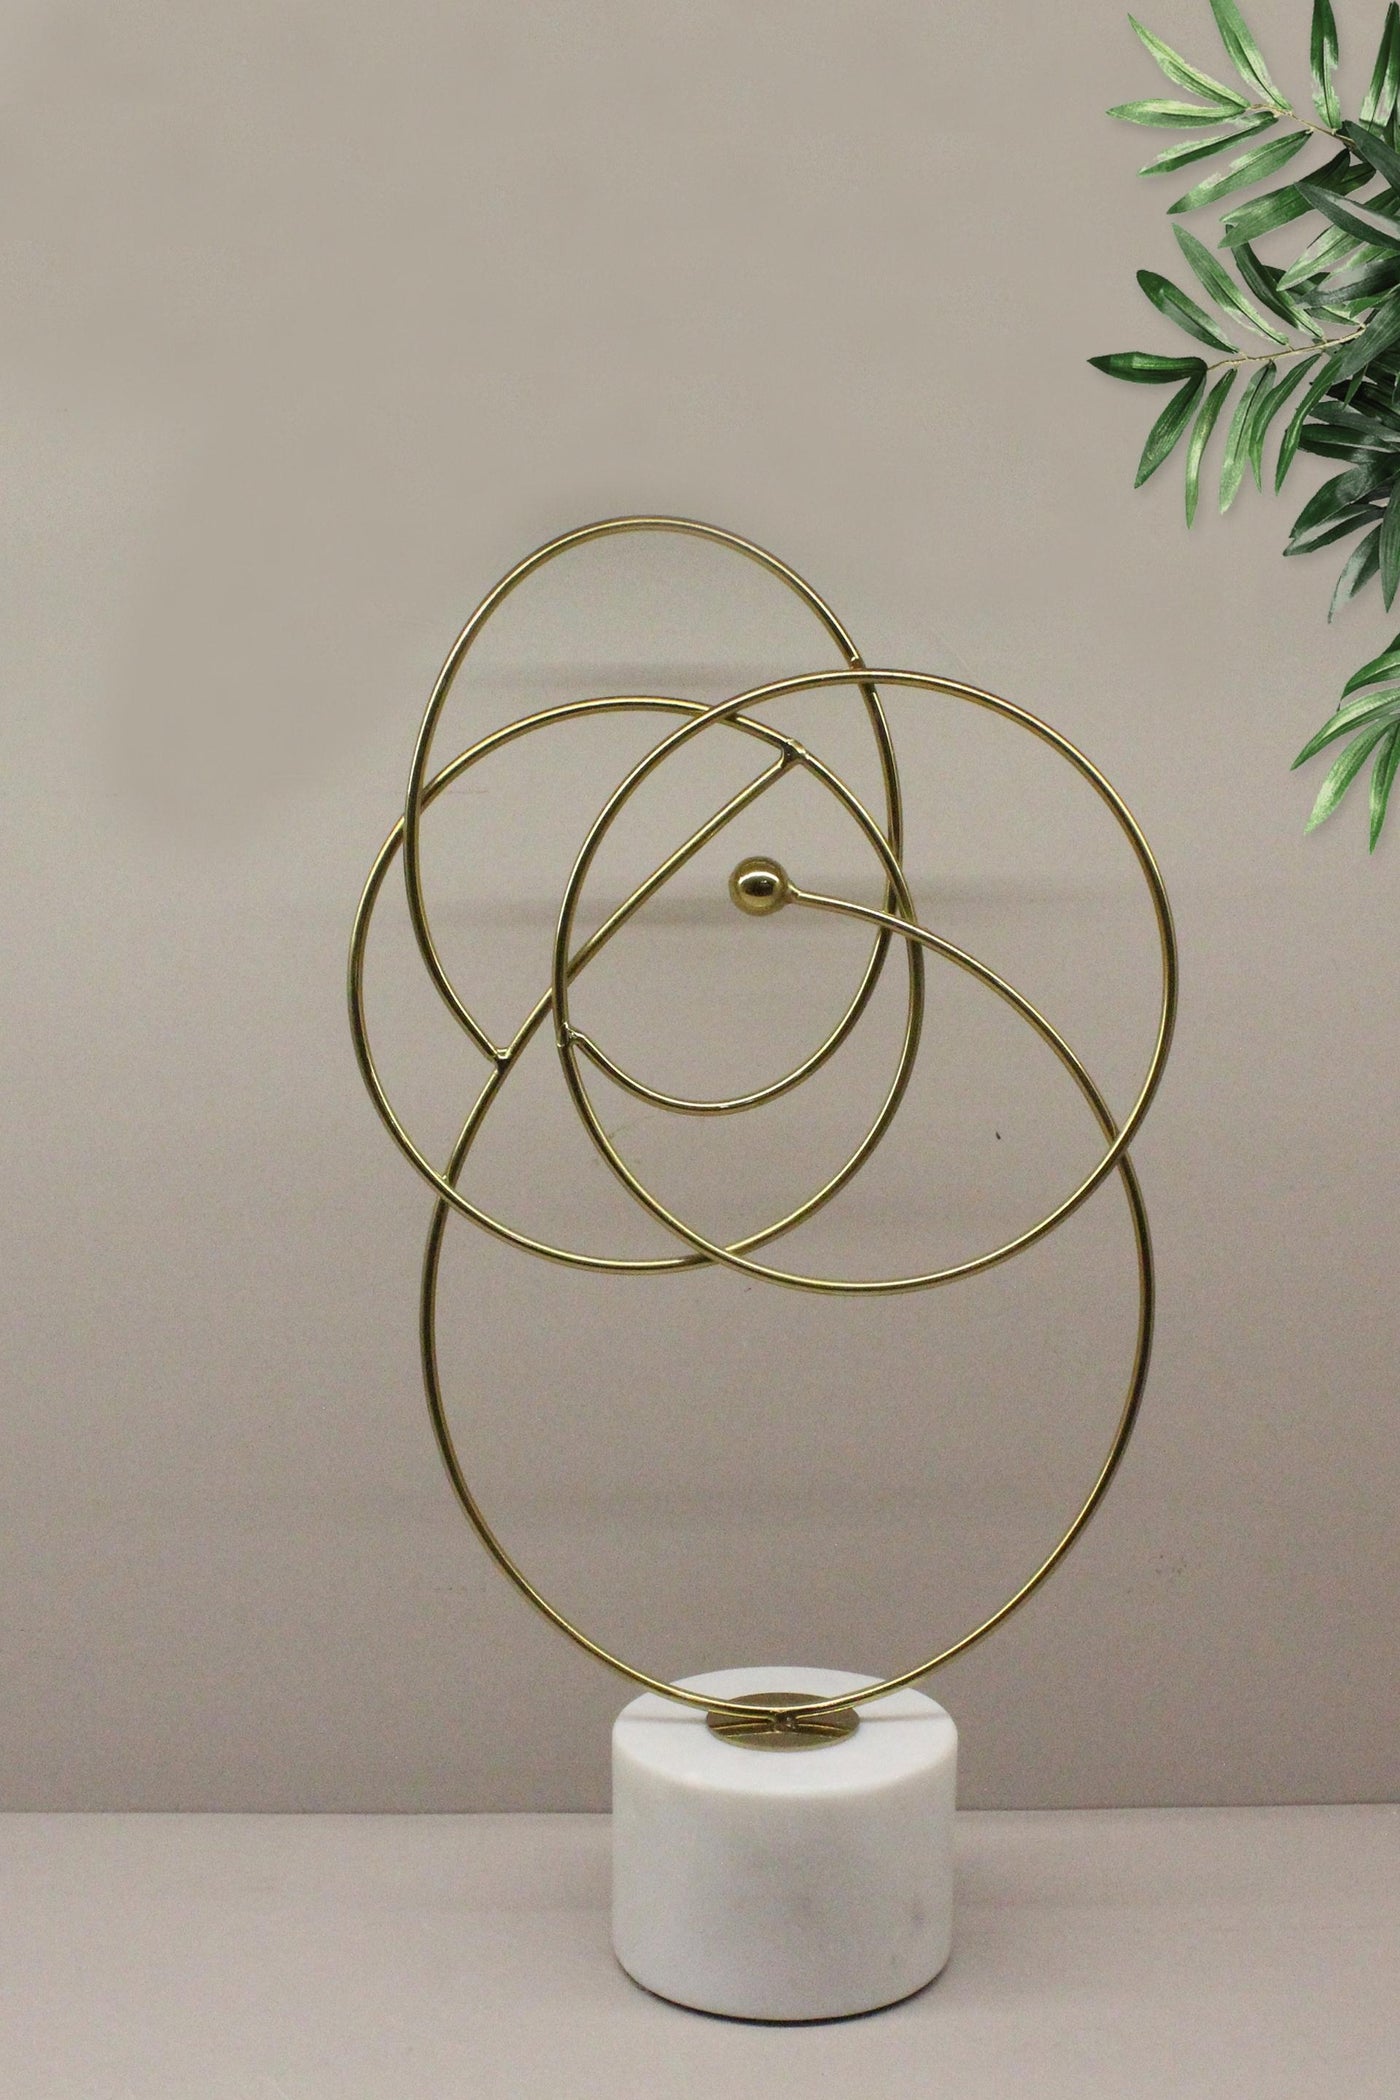 Abstract Scribble Metal Sculpture for your Home or office decor-Small